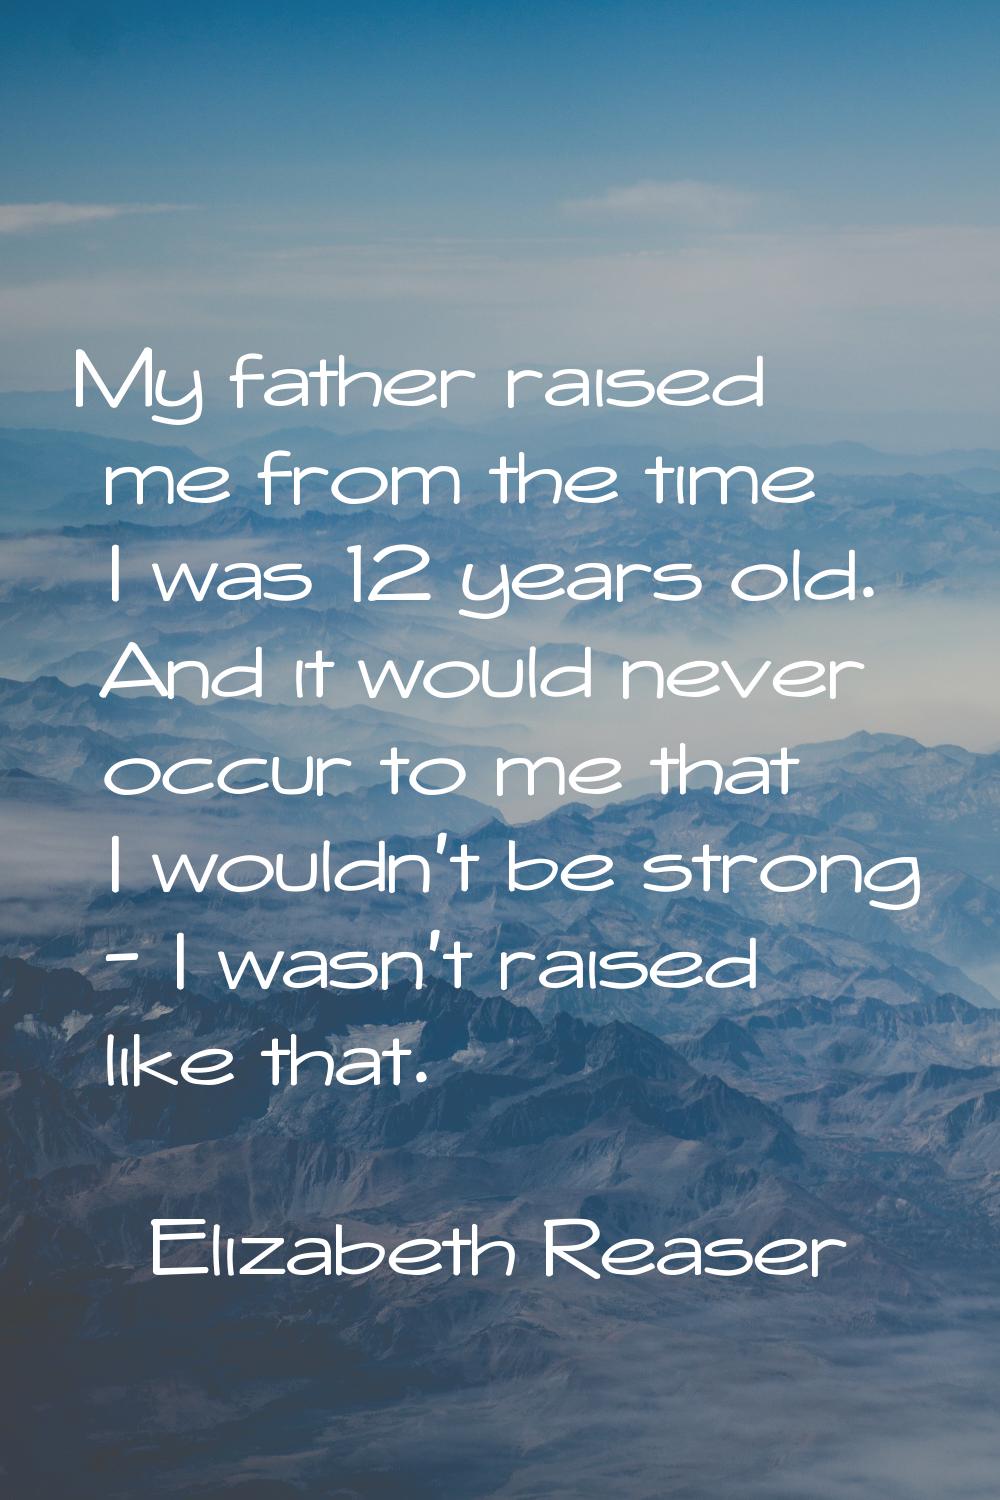 My father raised me from the time I was 12 years old. And it would never occur to me that I wouldn'